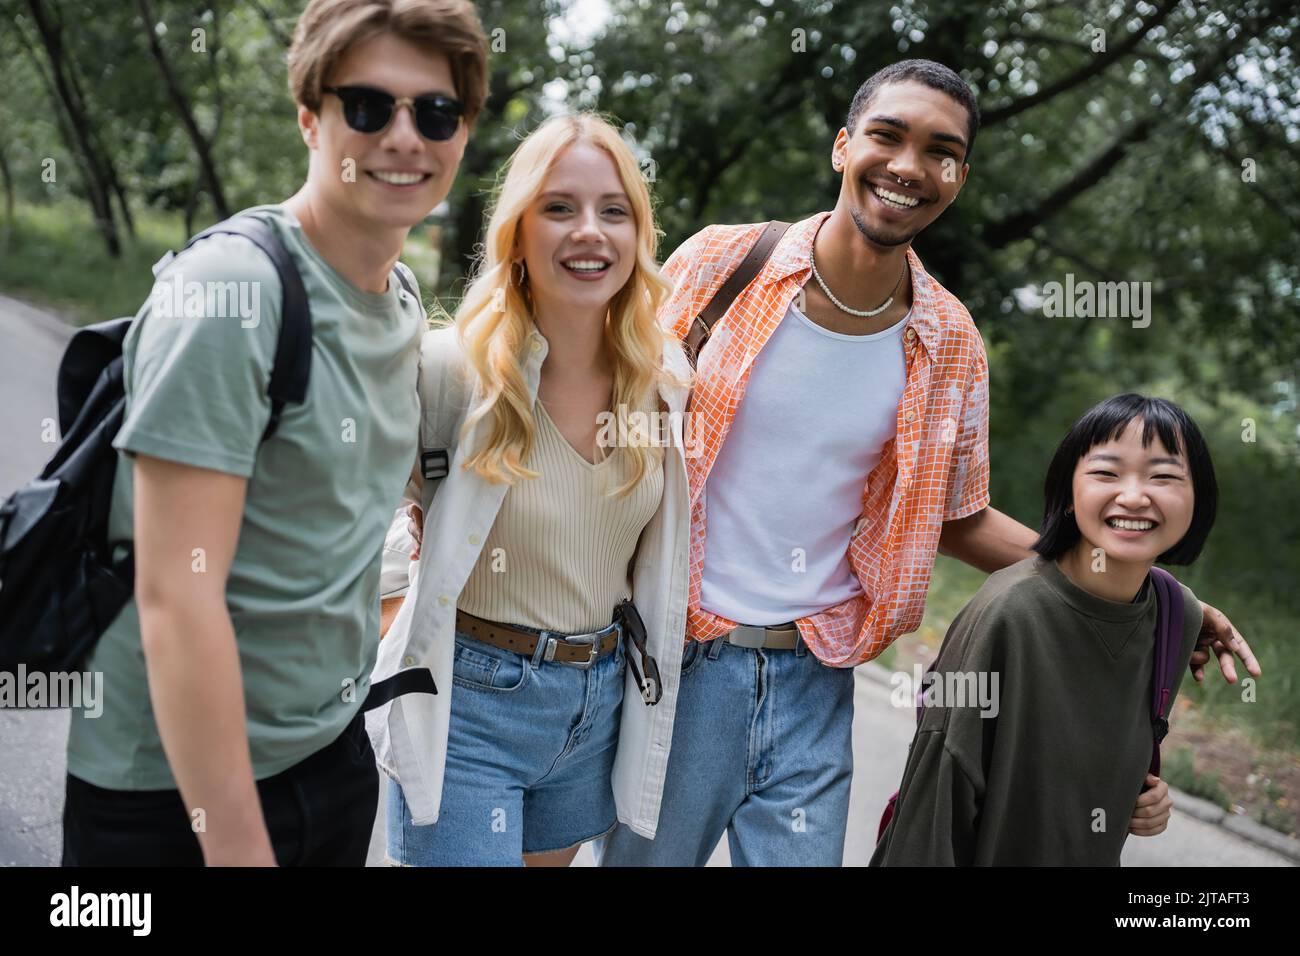 happy multicultural travelers with backpacks smiling at camera outdoors Stock Photo